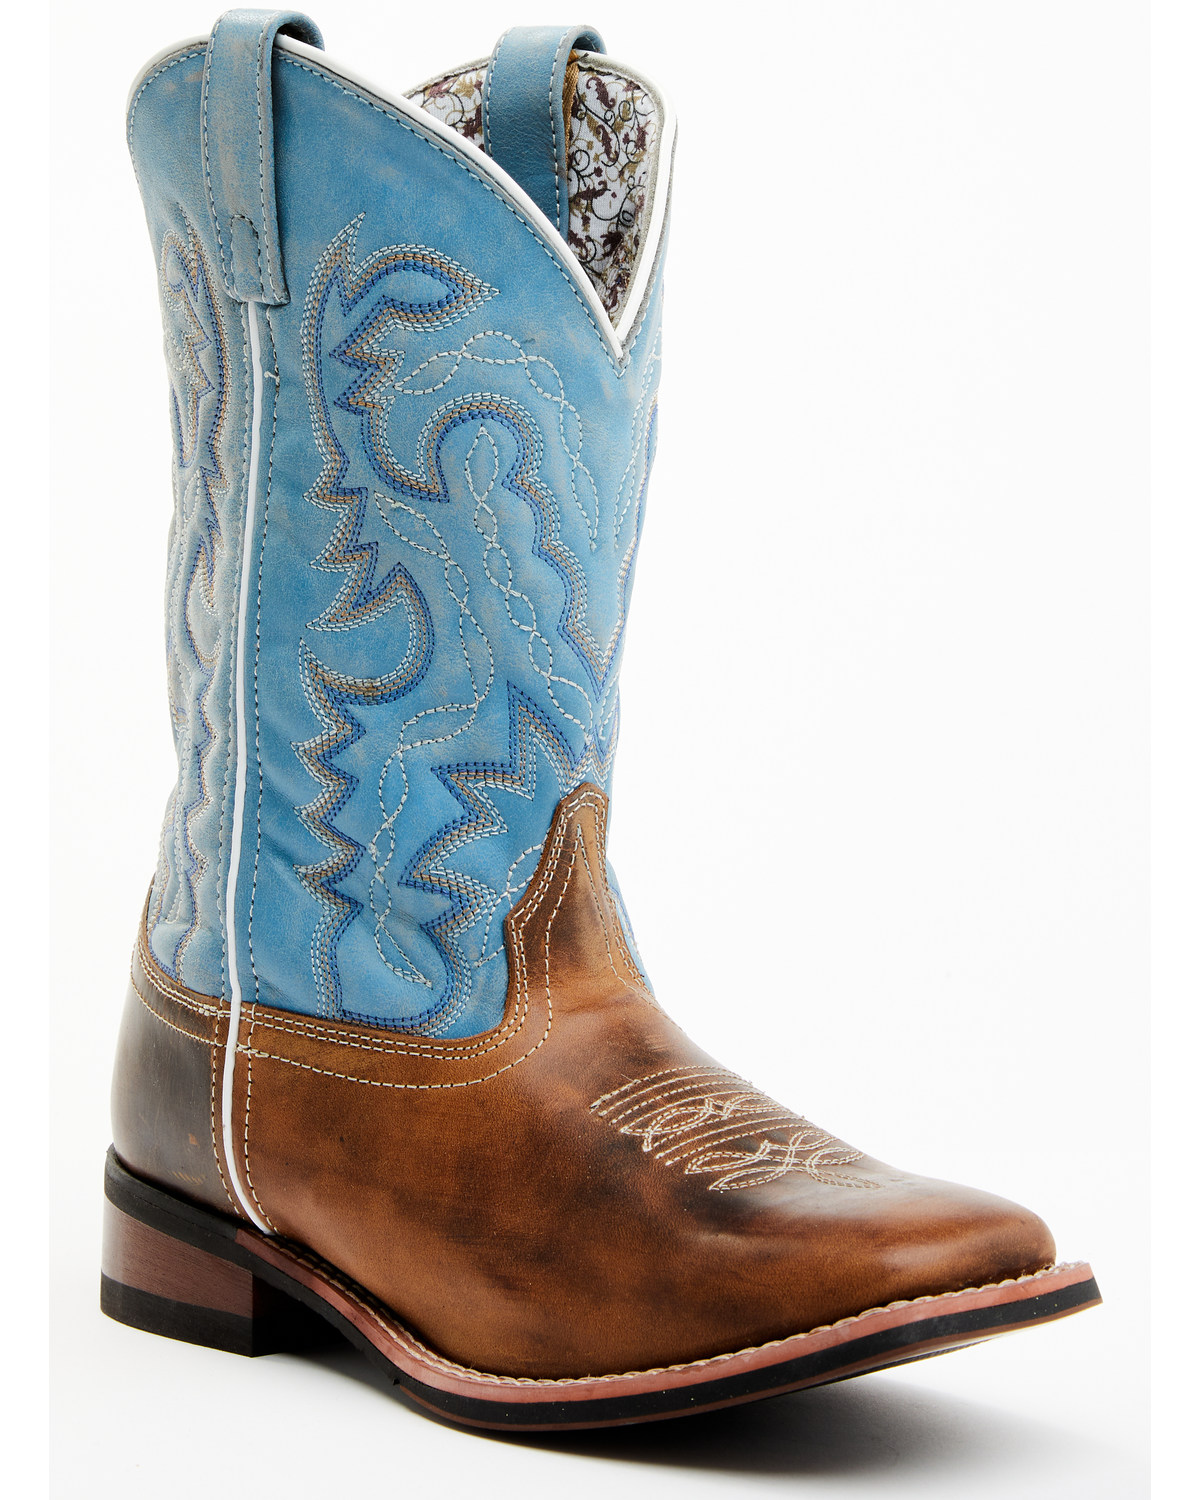 Laredo Women's Darla Embroidered Burnished Leather Western Performance Boots - Broad Square Toe